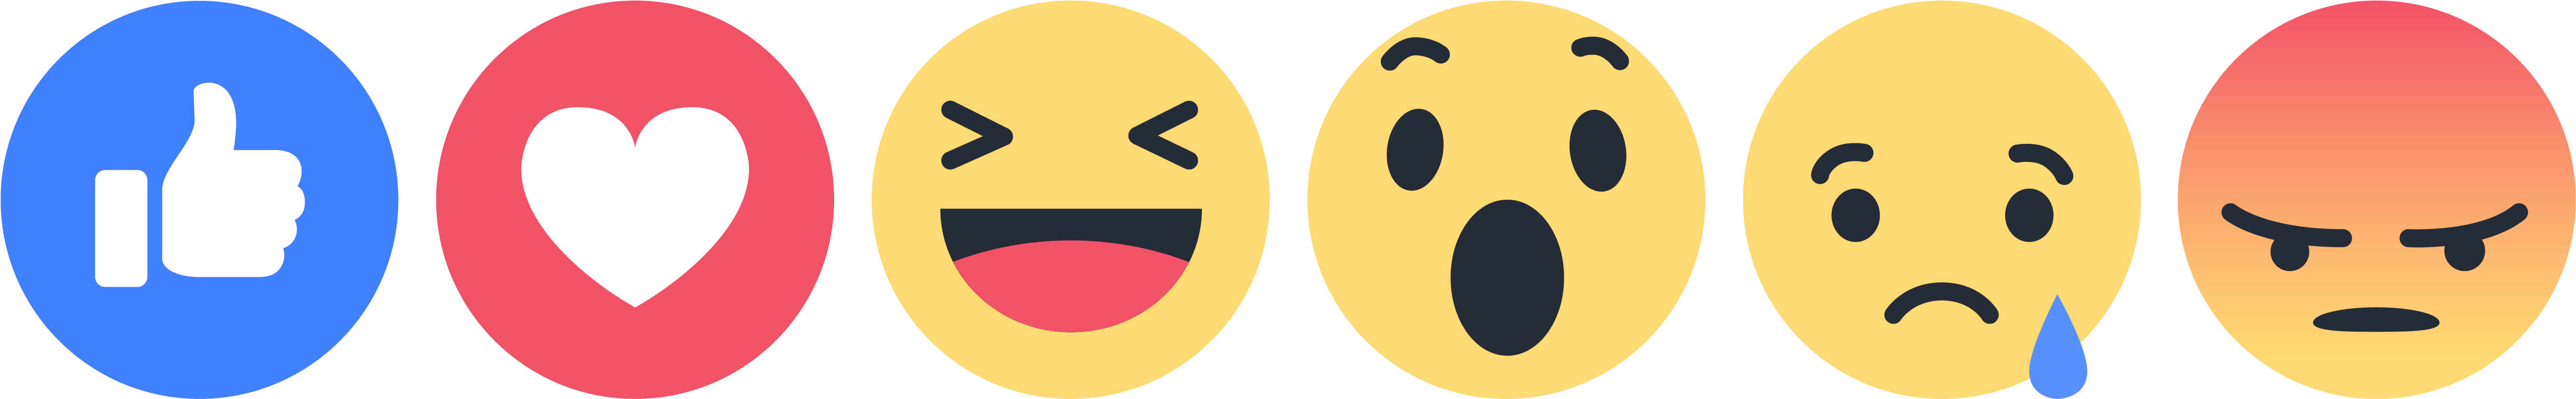 Reactions - Satisfaction Scale 1 5 (6055x1378)